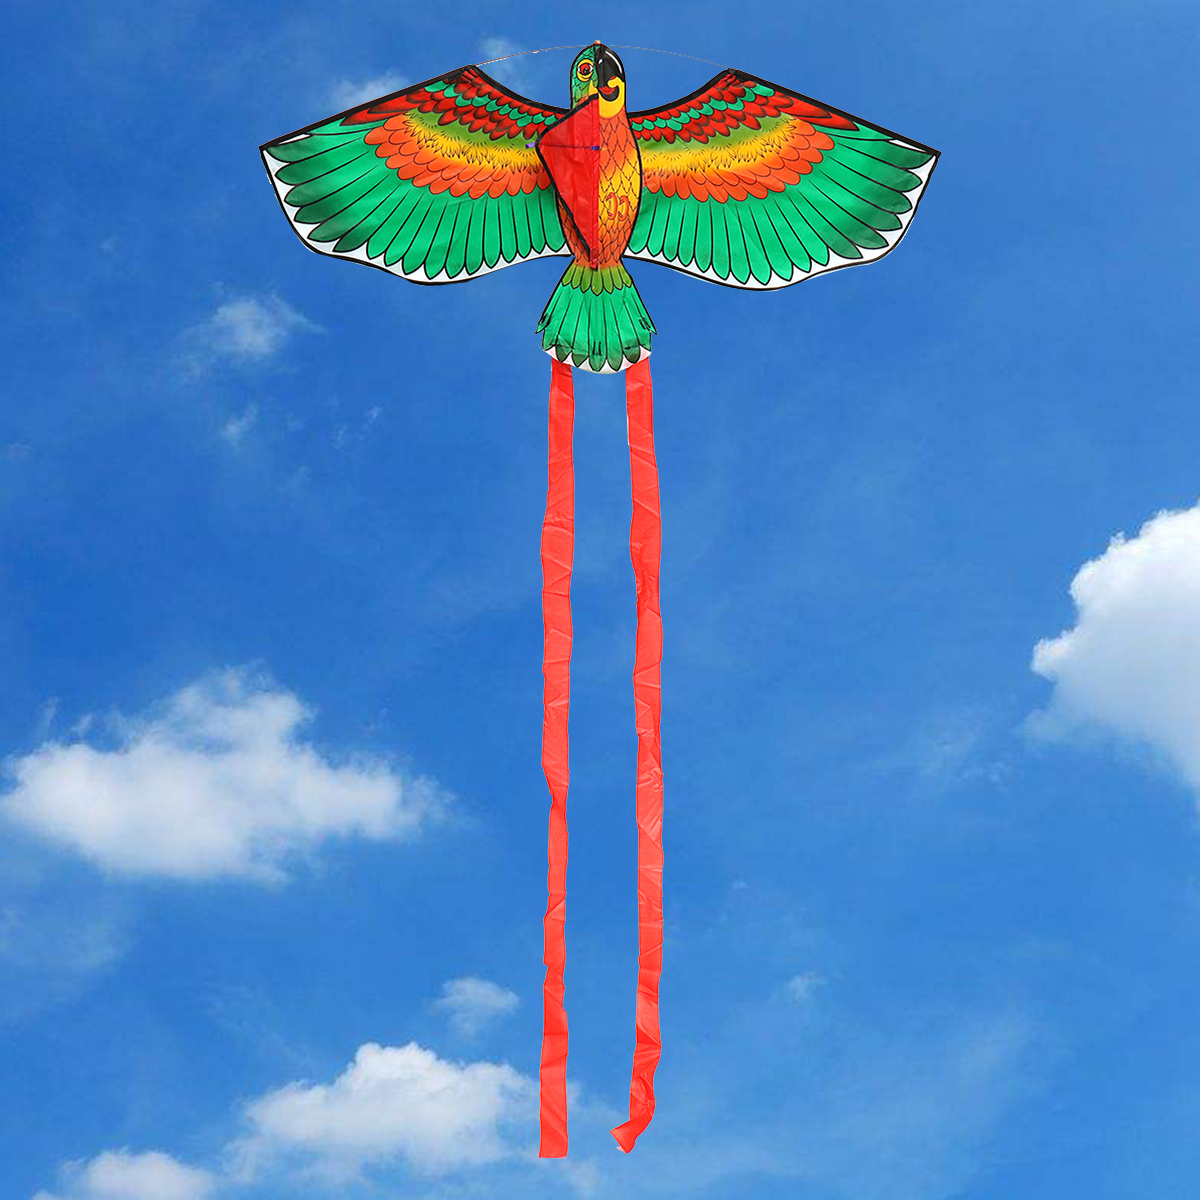 Outdoor-Beach-Park-Polyester-Camping-Flying-Kite-Bird-Parrot-Steady-With-String-Spool-For-Adults-Kid-1347624-6